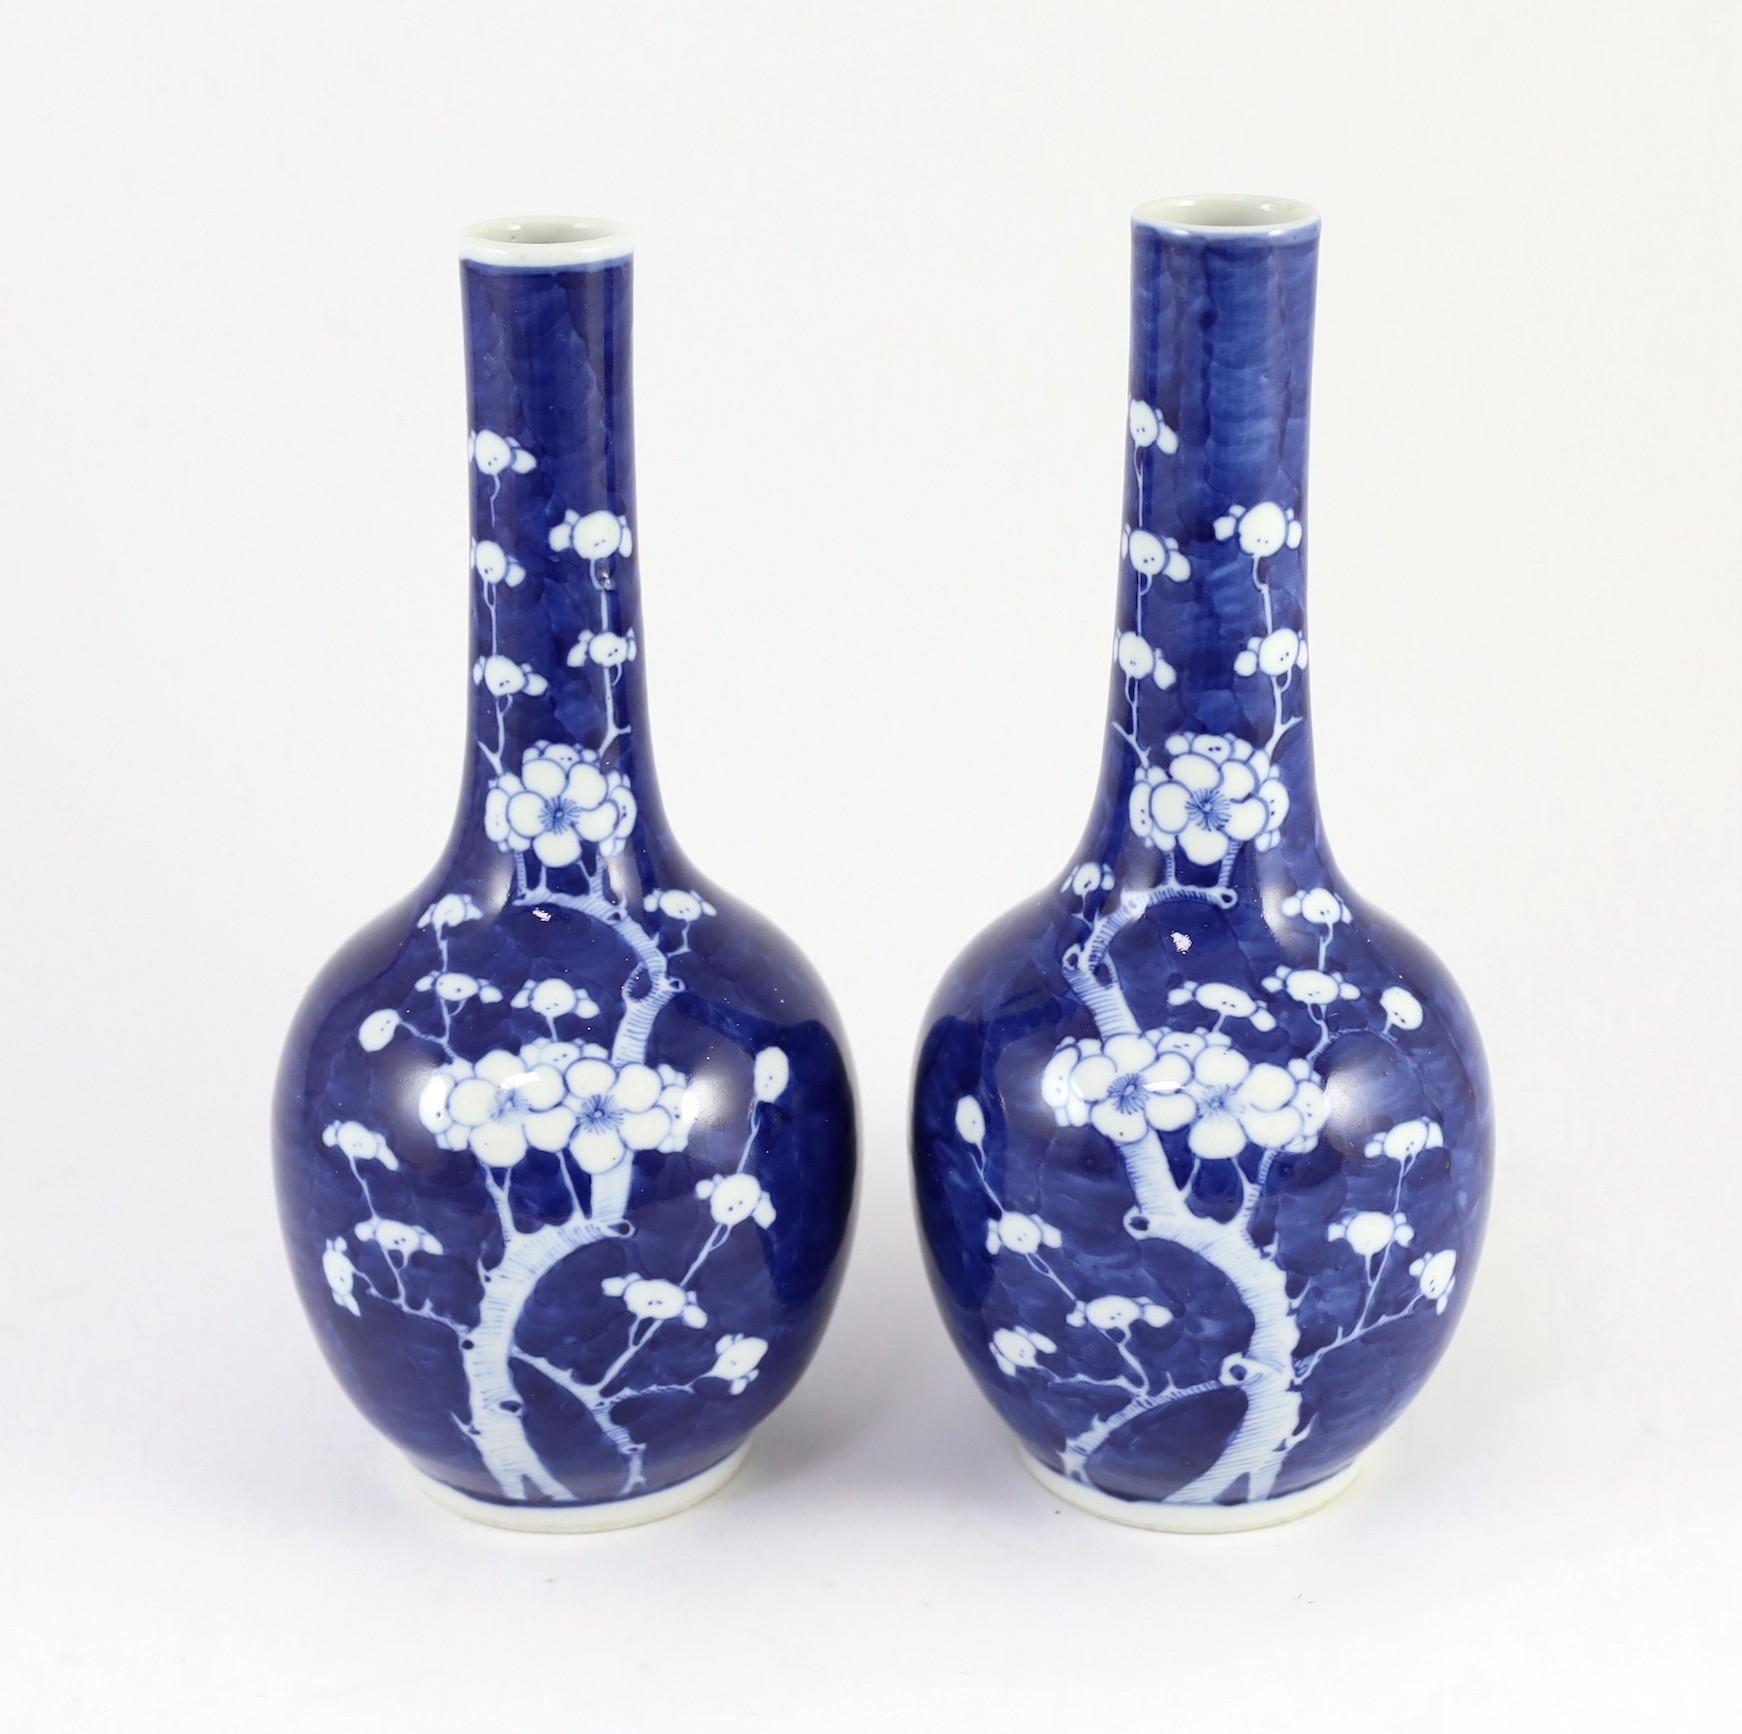 A pair of Chinese blue and white prunus bottle vases, early 20th century, 26cm